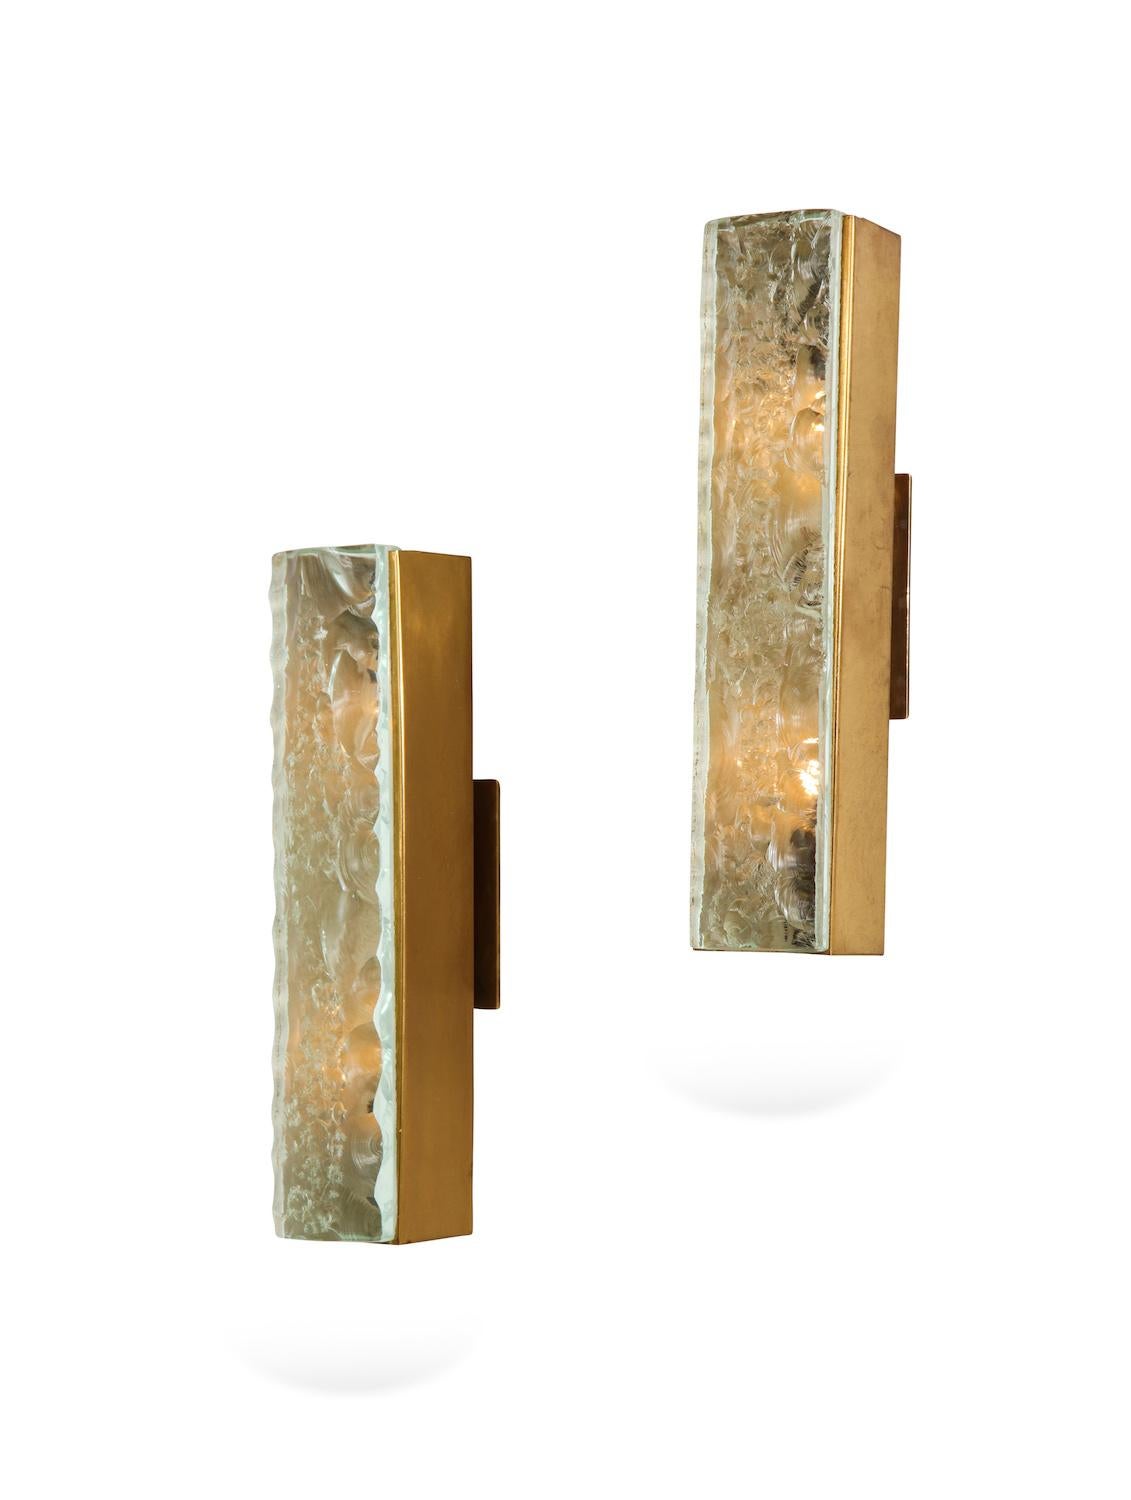 Pair of #2368 sconces by Max Ingrand for Fontana Arte. Rare forms of rectangular brass structures with thick, chipped-glass faces. Each sconce has 2 candelabra sockets inside. Published: Fontana Arte, Bagno, 1965. Manufacturers self-published